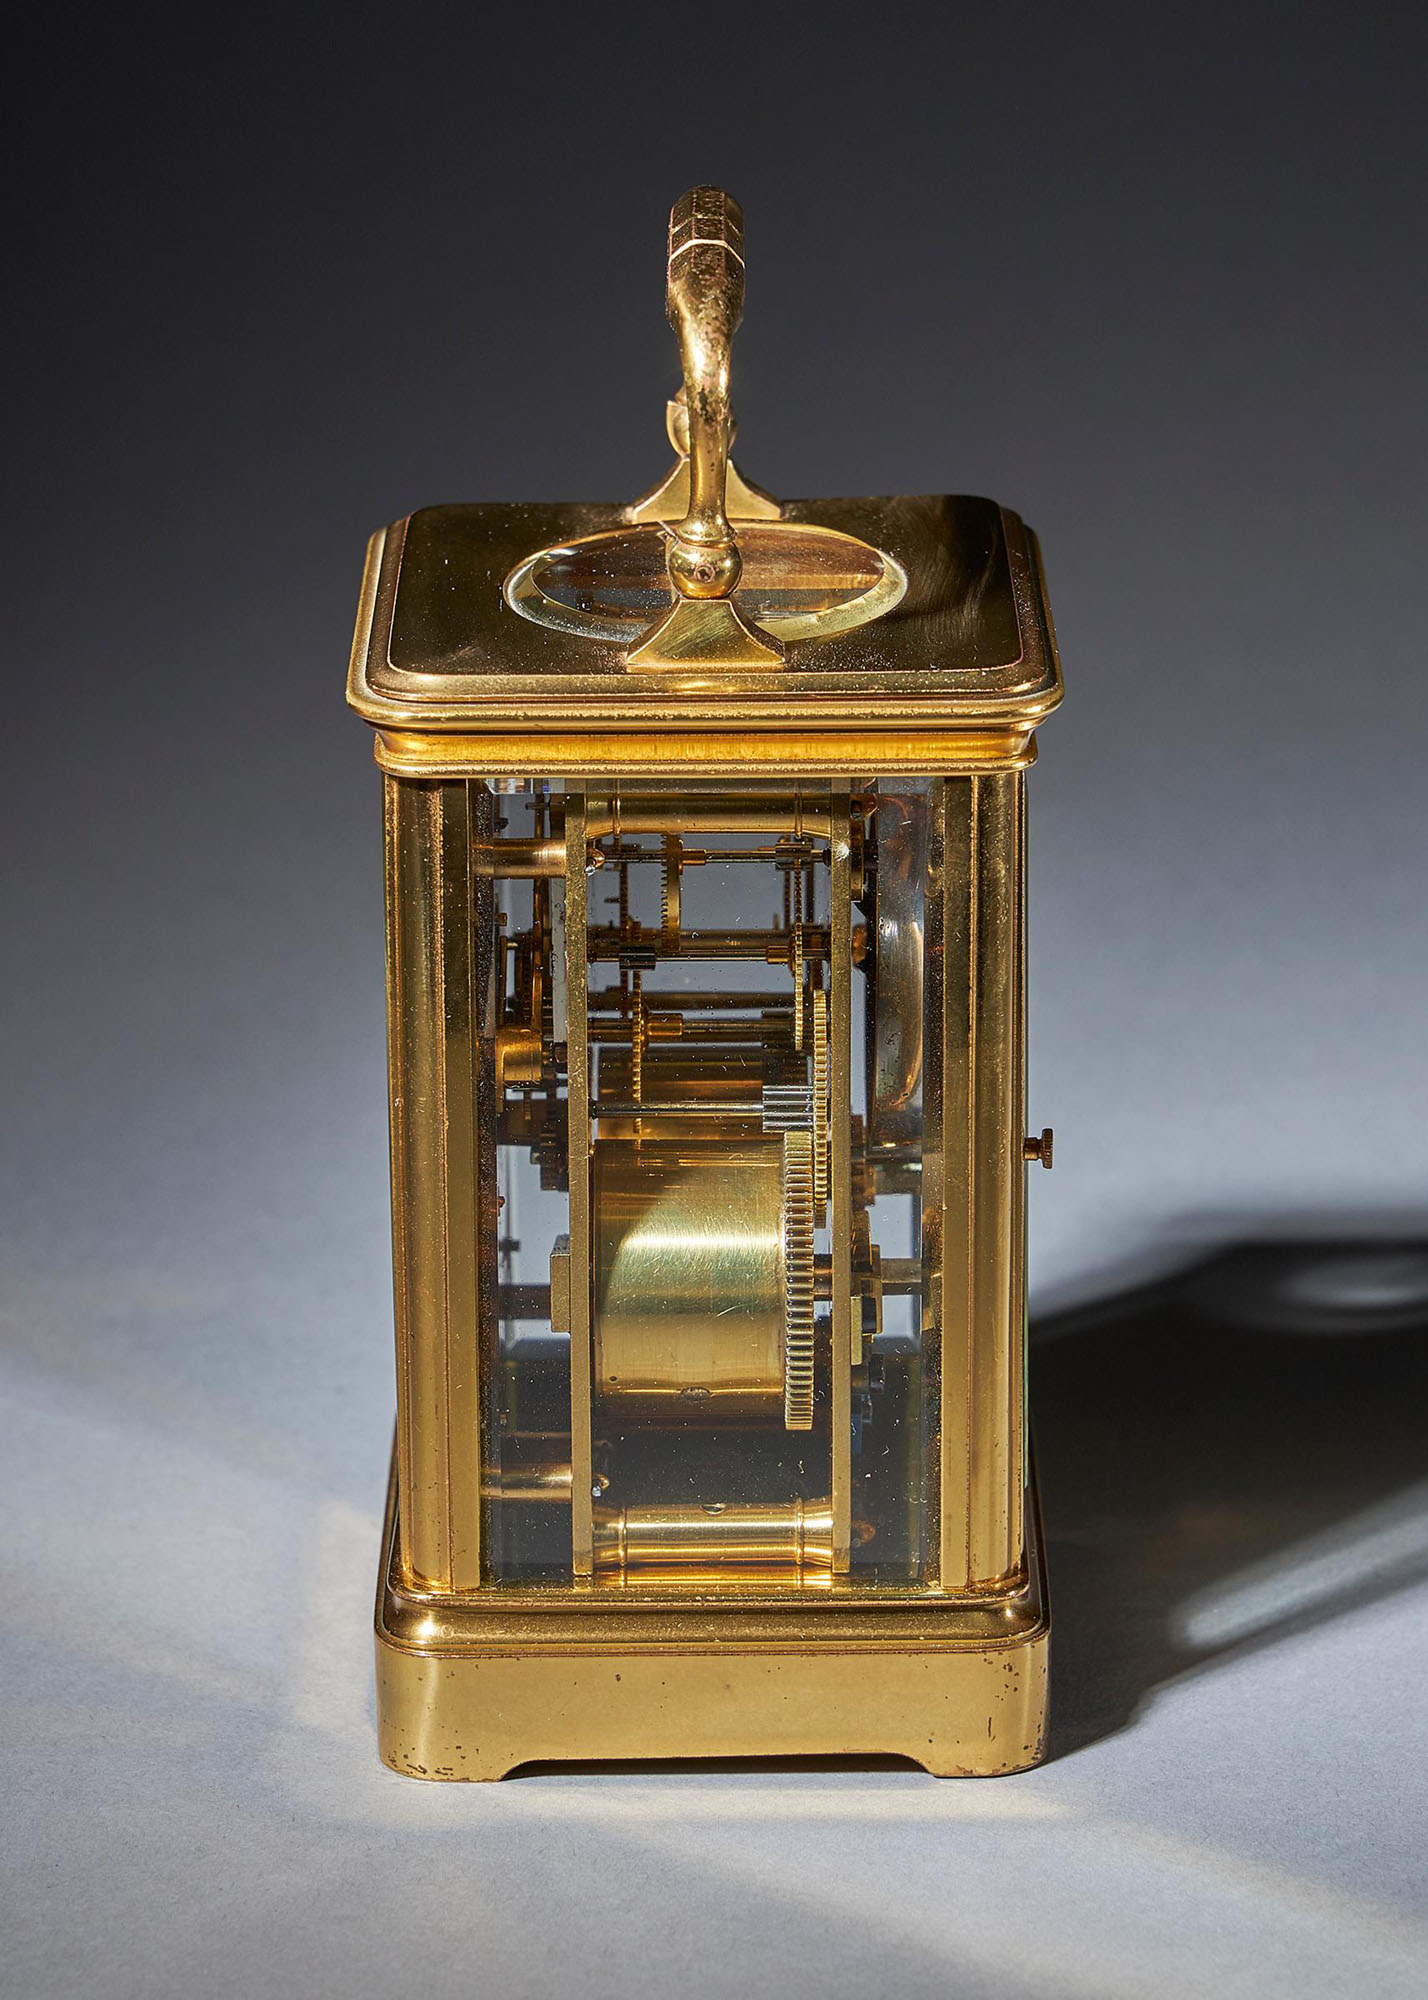 Striking 19th Century Carriage Clock with a Gilt-Brass Corniche Case by Grohé 3